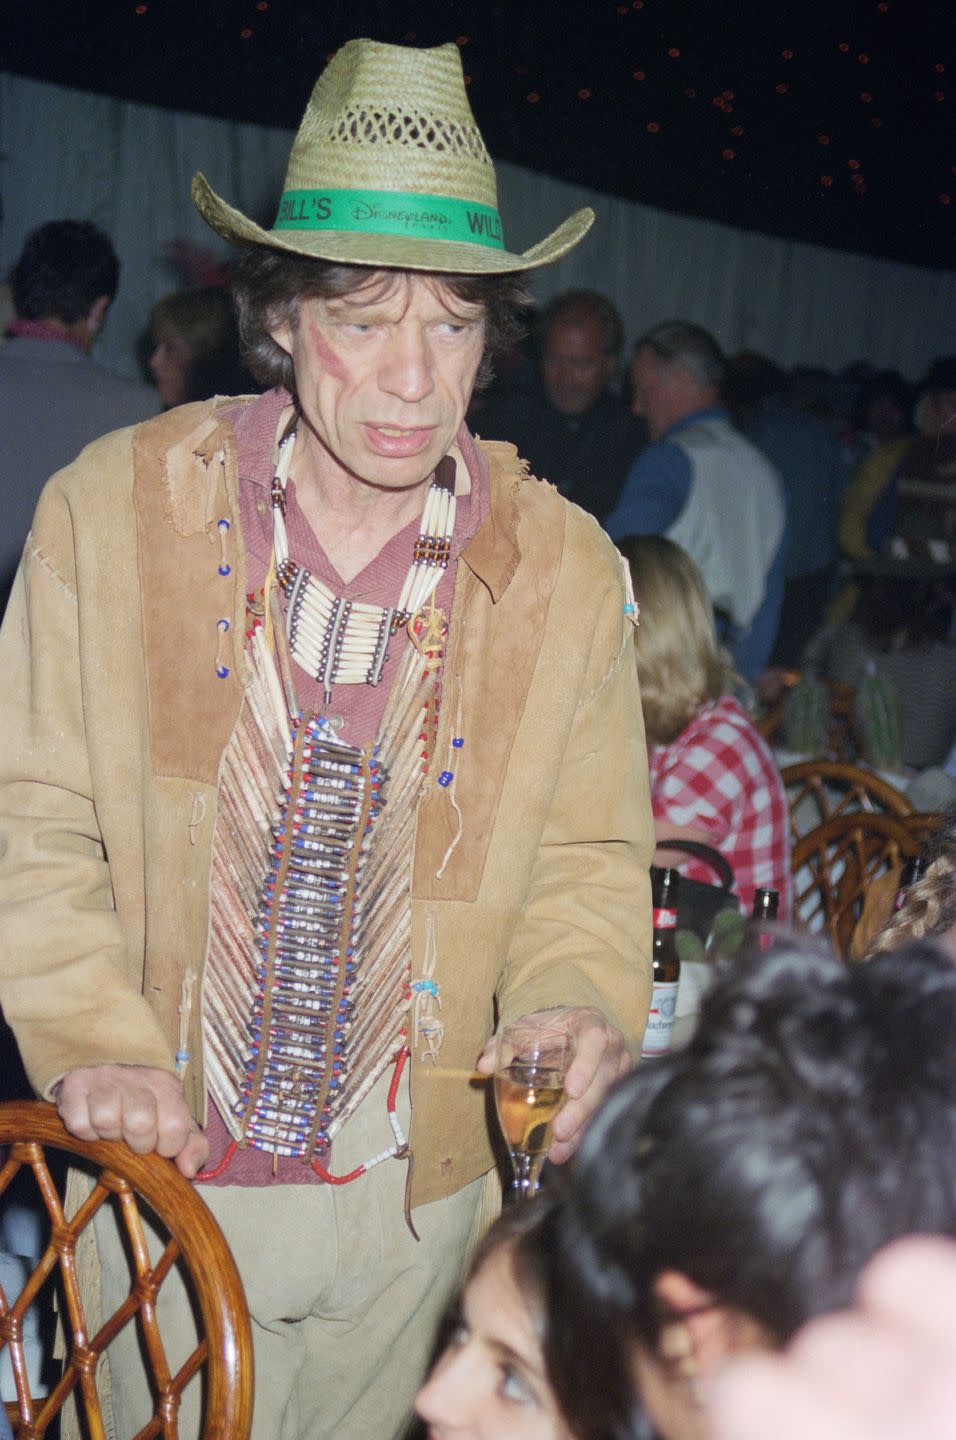 Celebrities Had a Wild Time in the '90s. These Rare Photos From Inside the Parties Prove It.